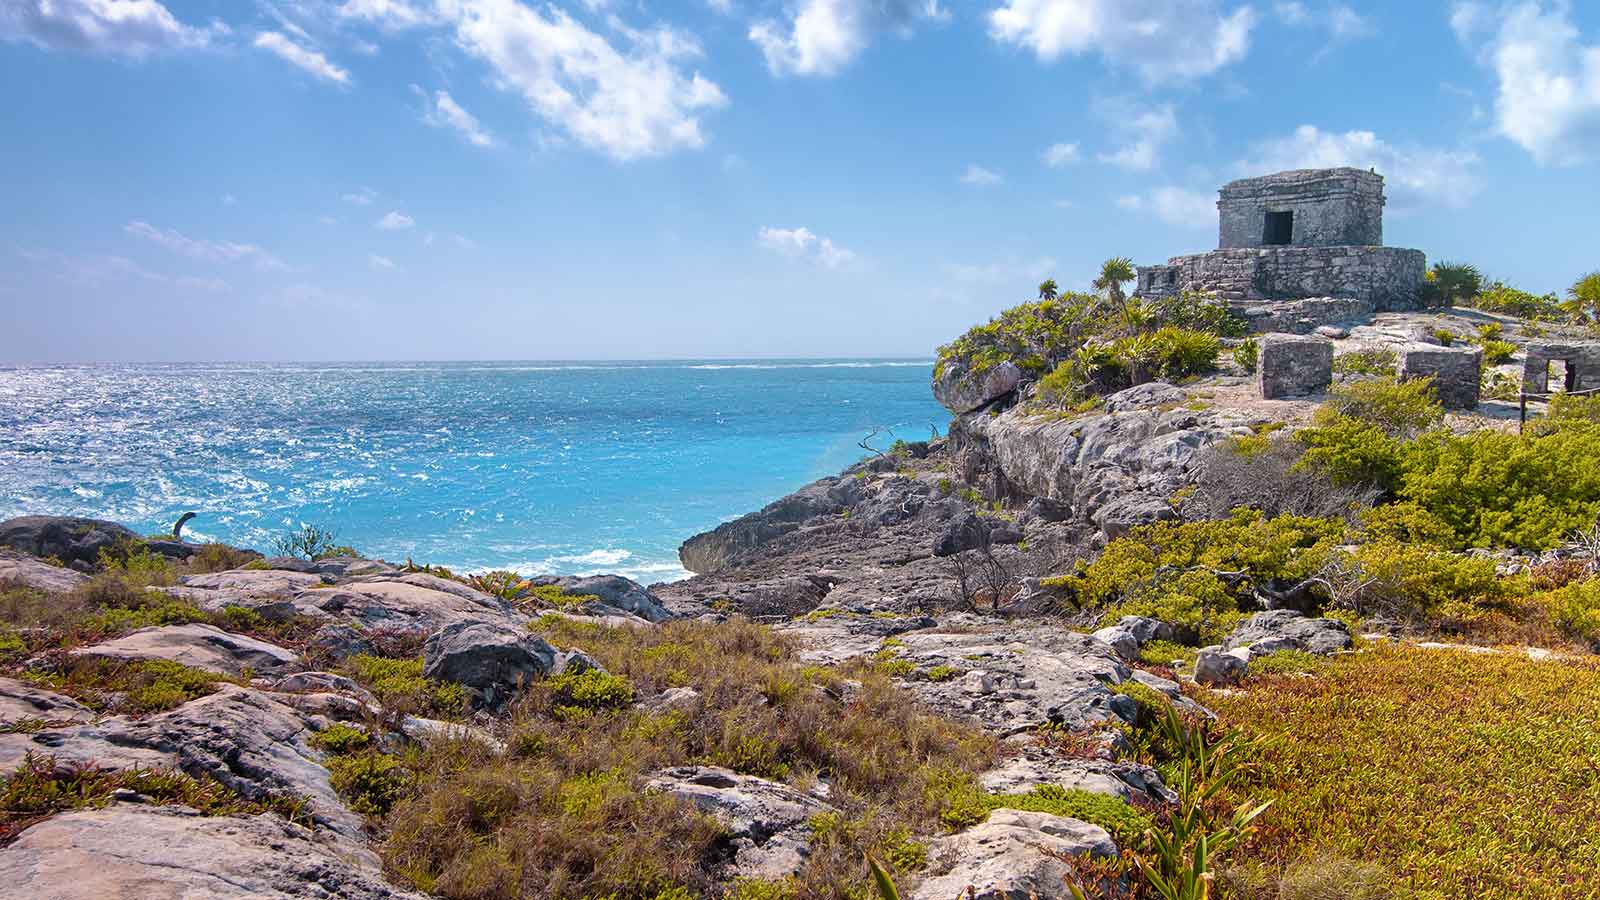 Explore ancient Maya civilizations in the Caribbean on a Getaway Cruise